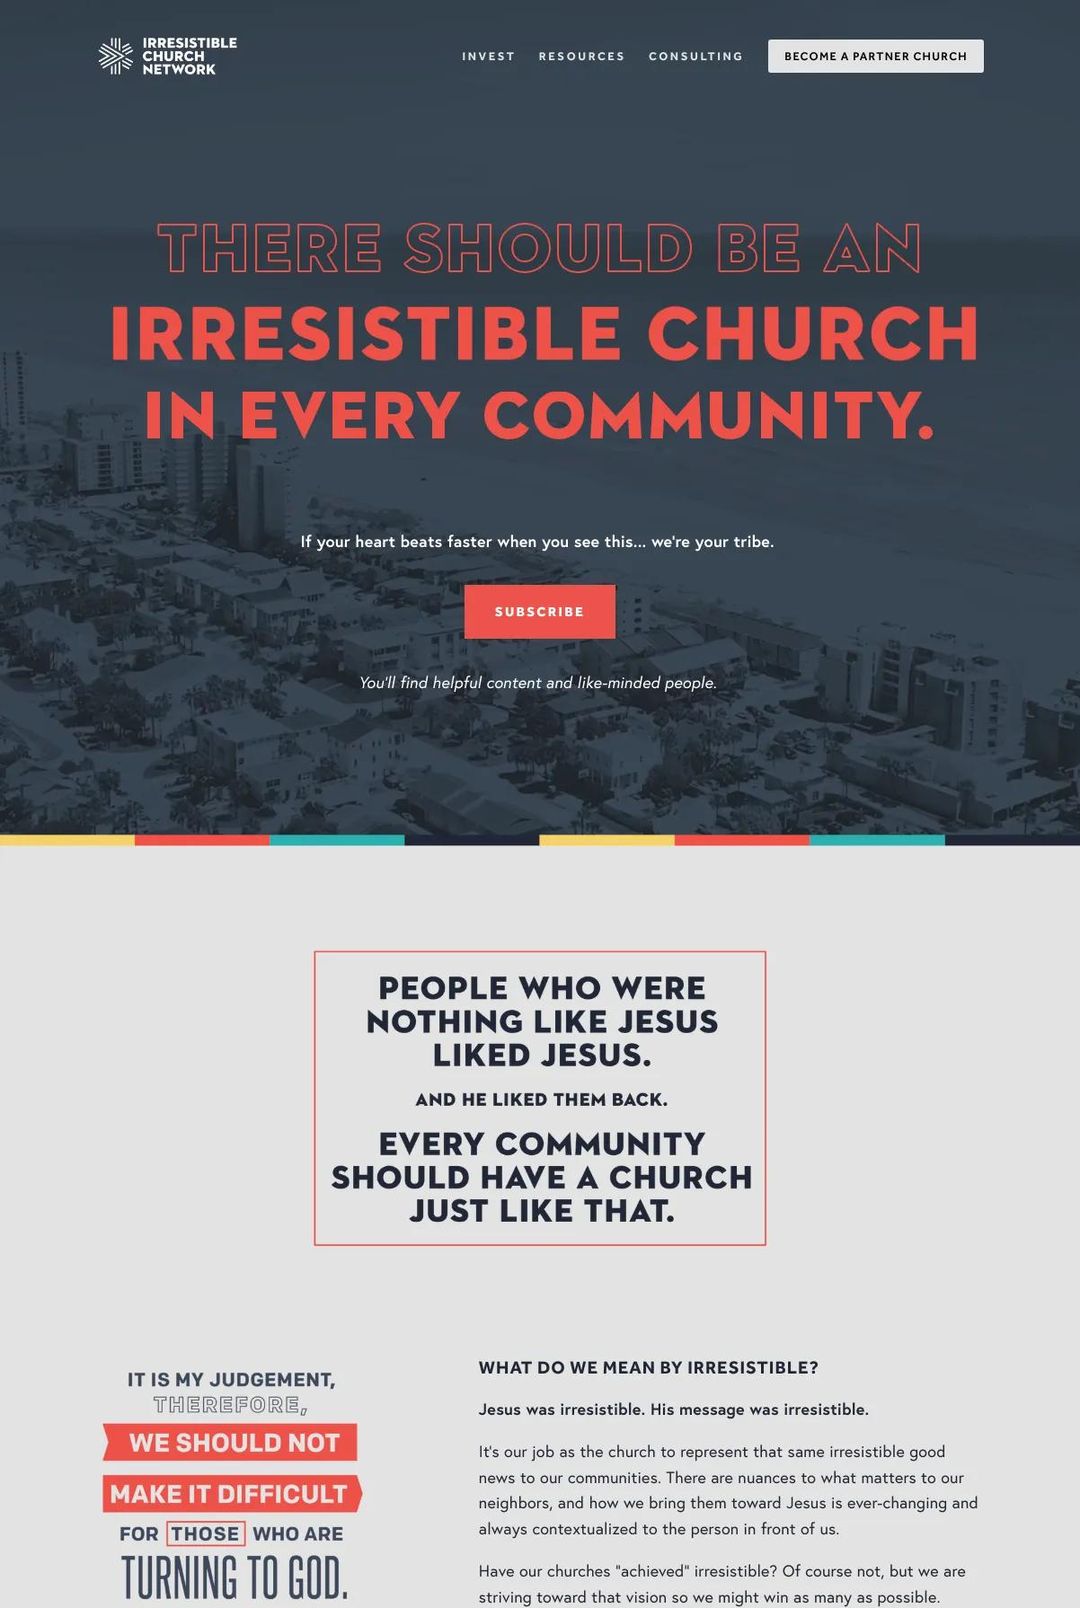 Screenshot 1 of Irresistible Church Network (Example Squarespace Church Website)